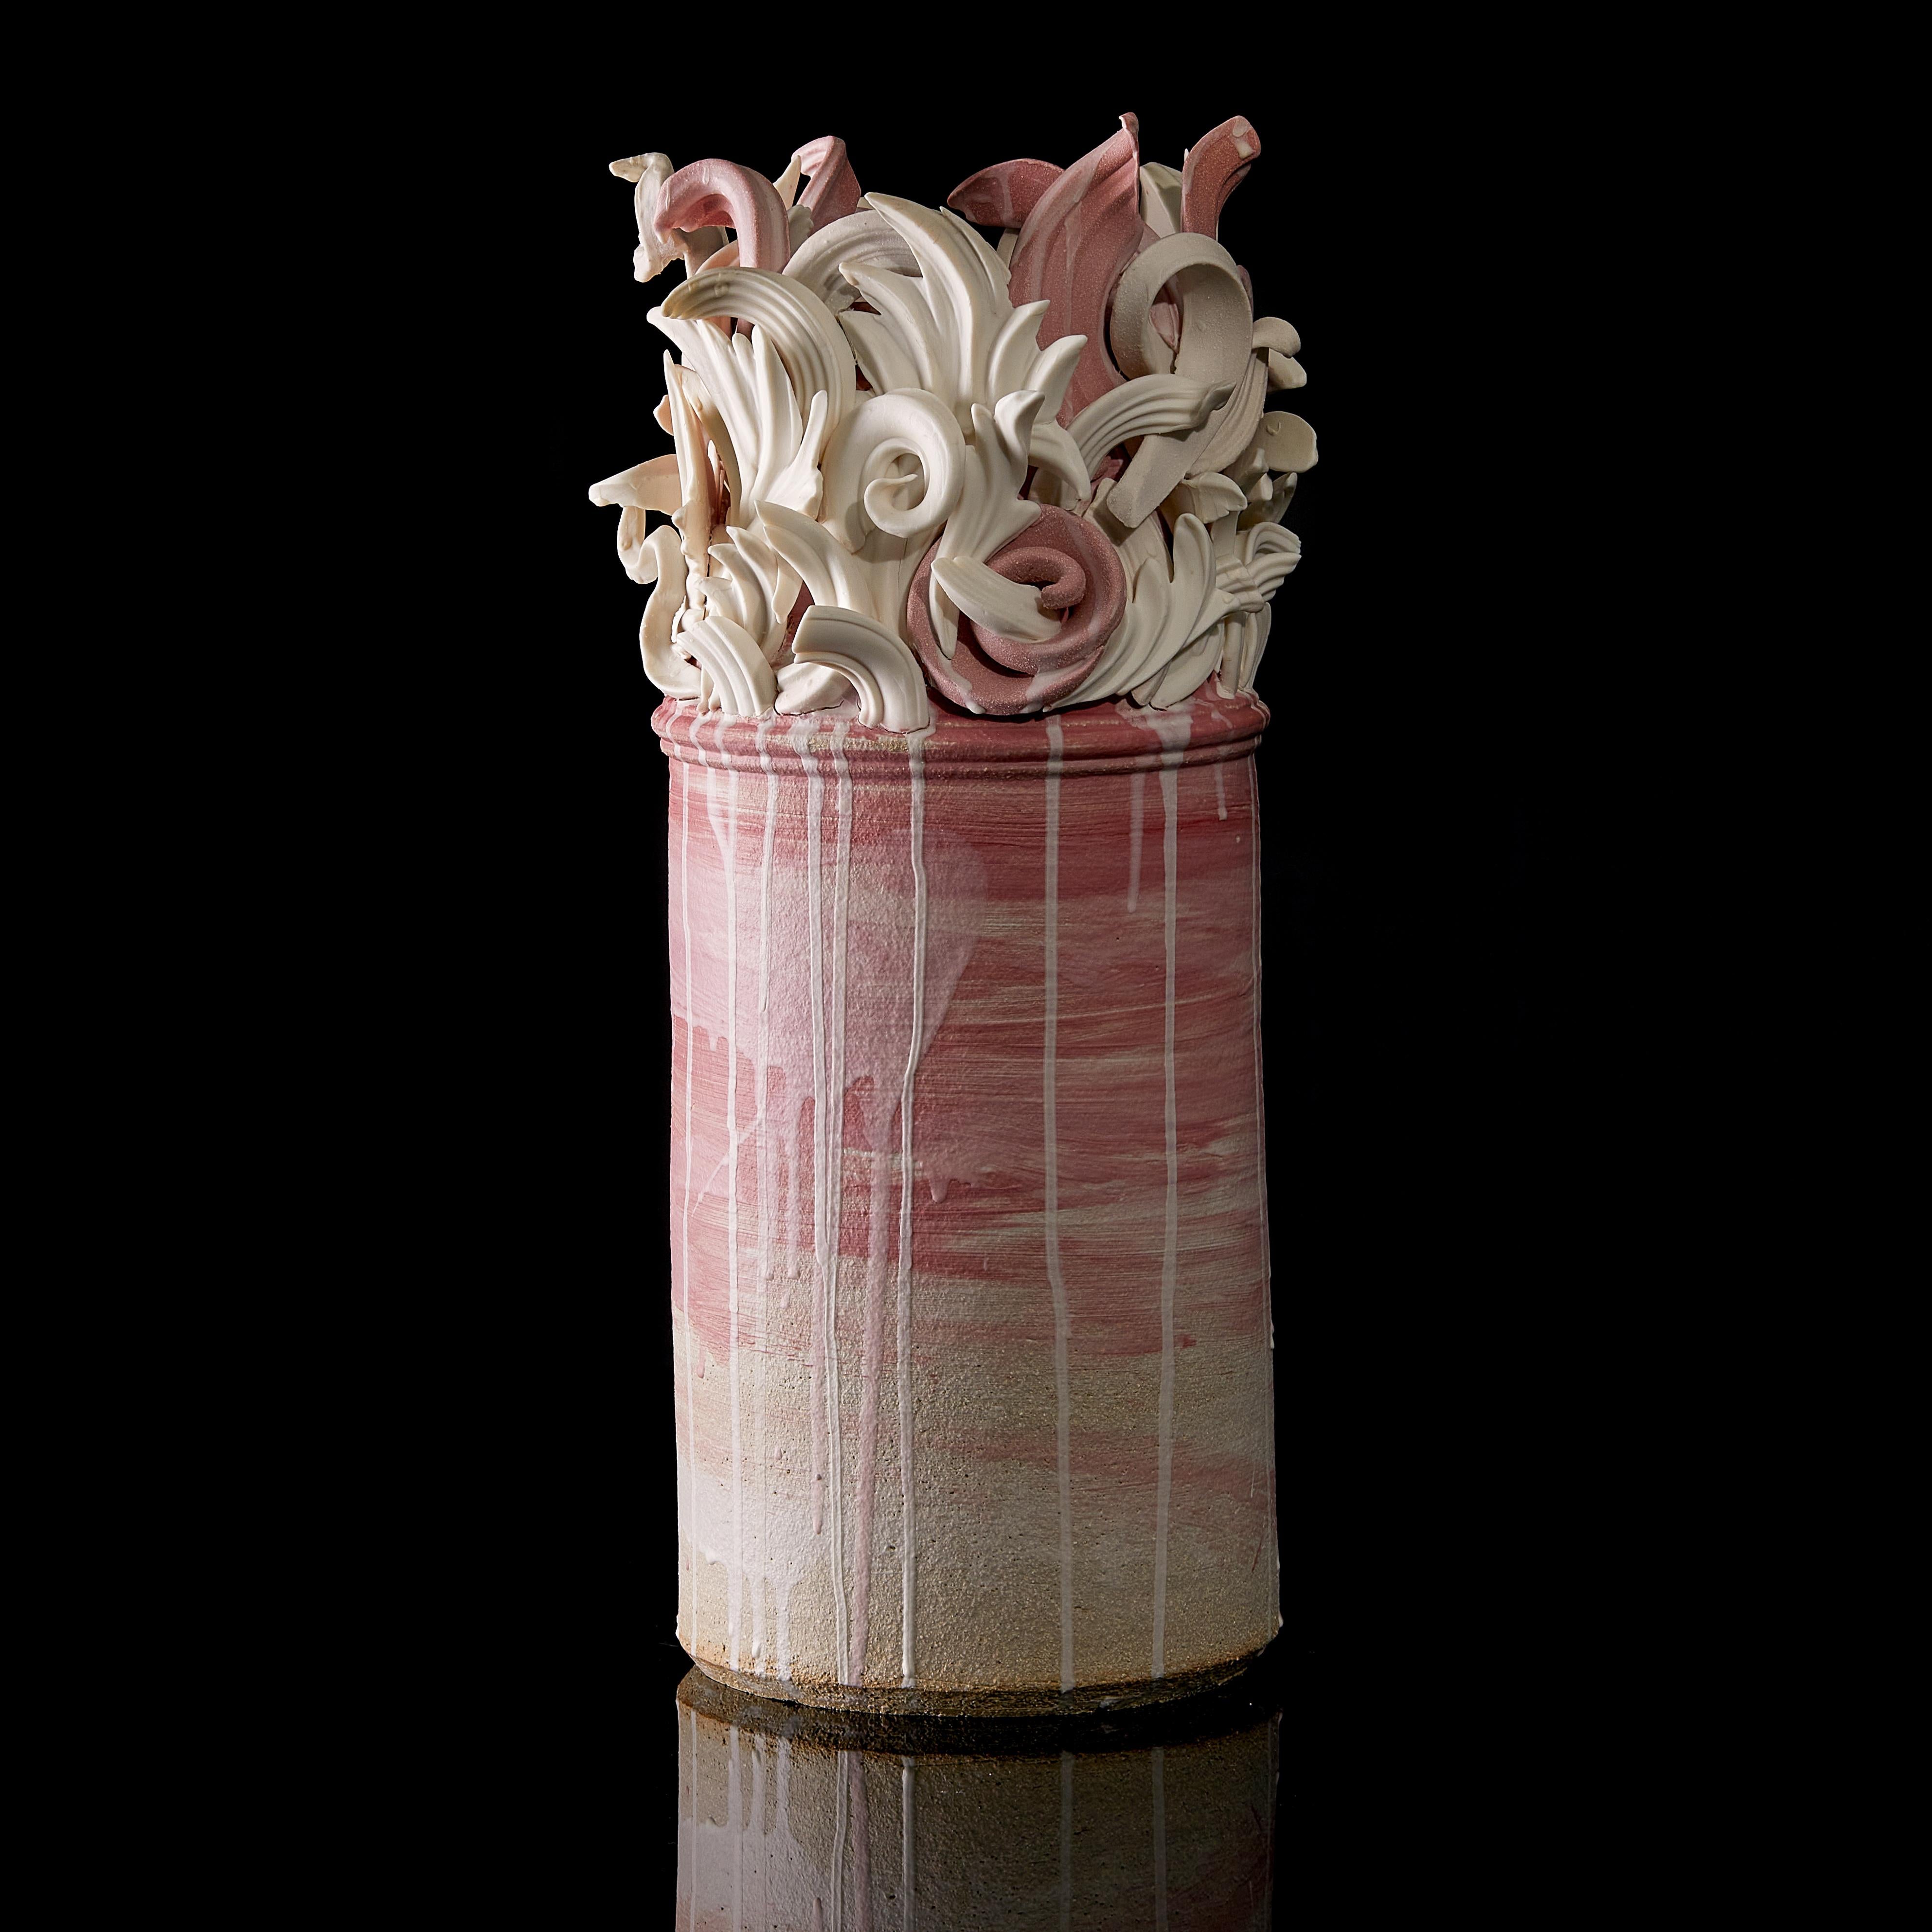 Colonnade I, a Unique Ceramic Sculptural Vase in Pink & White by Jo Taylor For Sale 2